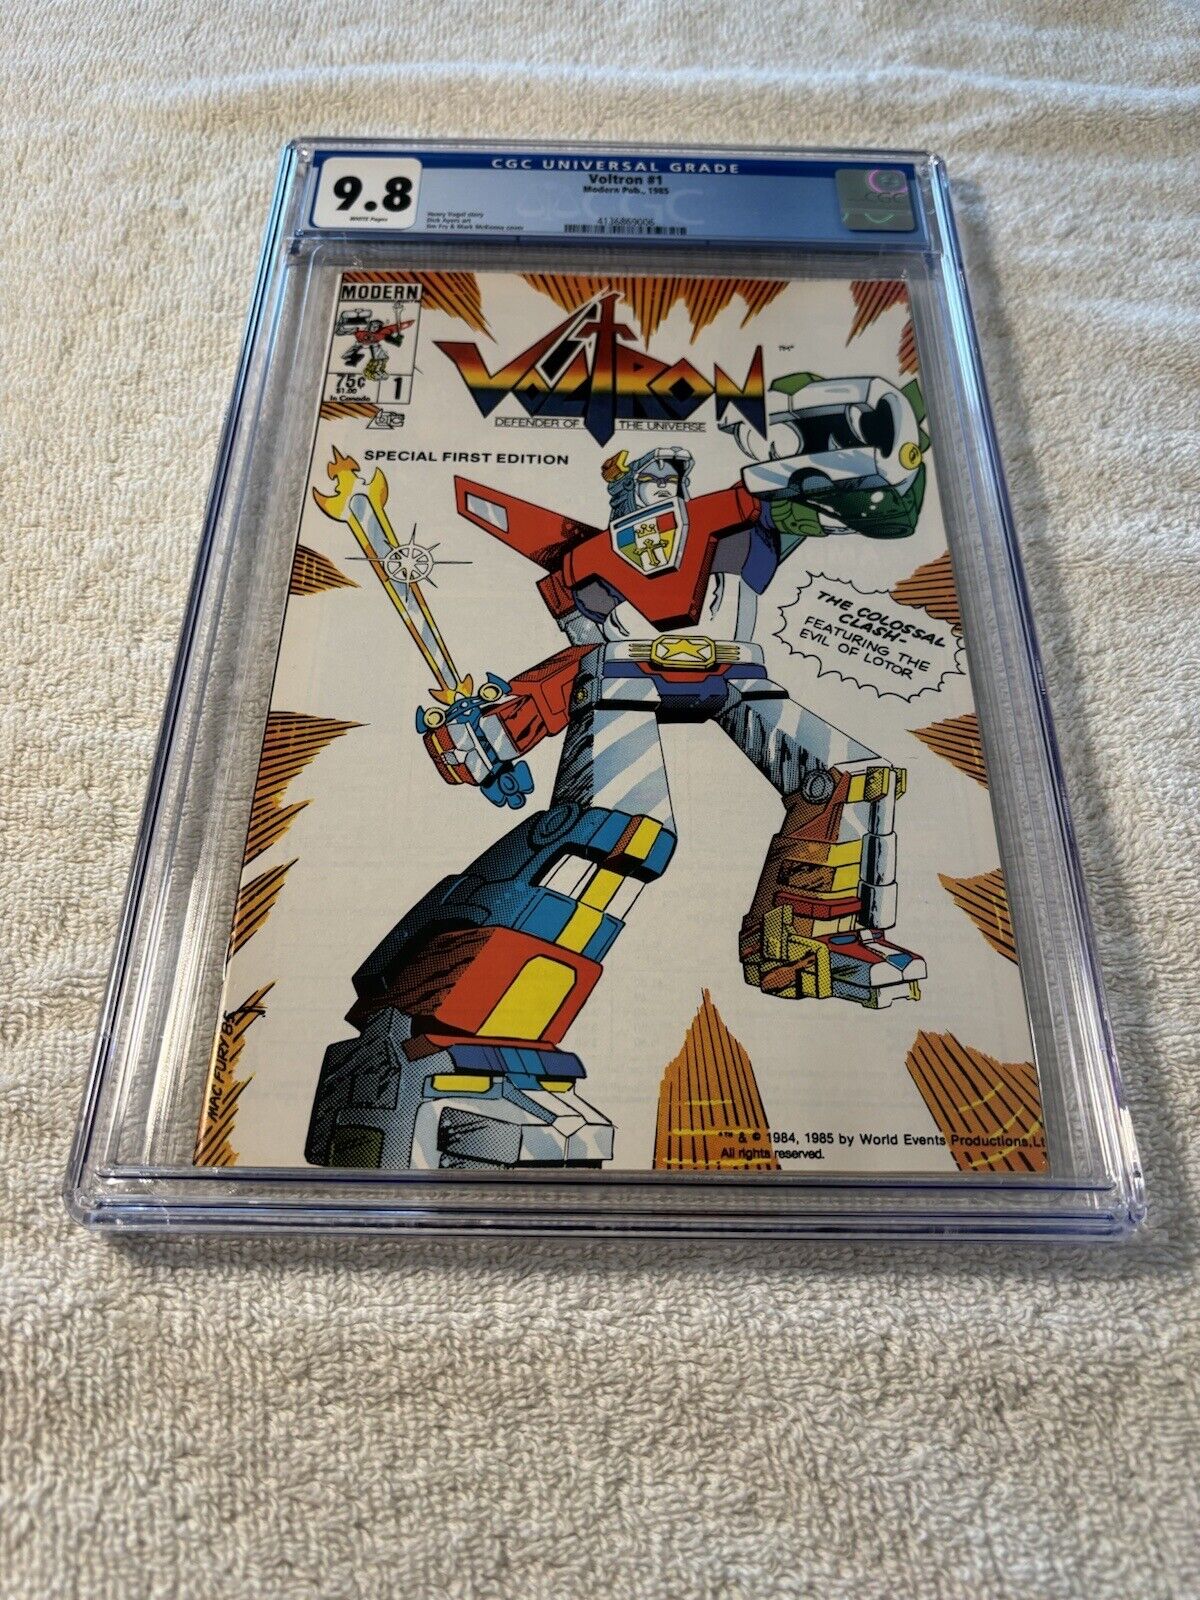 Voltron #1   CGC 9.8 1st Appearance of Voltron in US comics Modern Pub. 1985